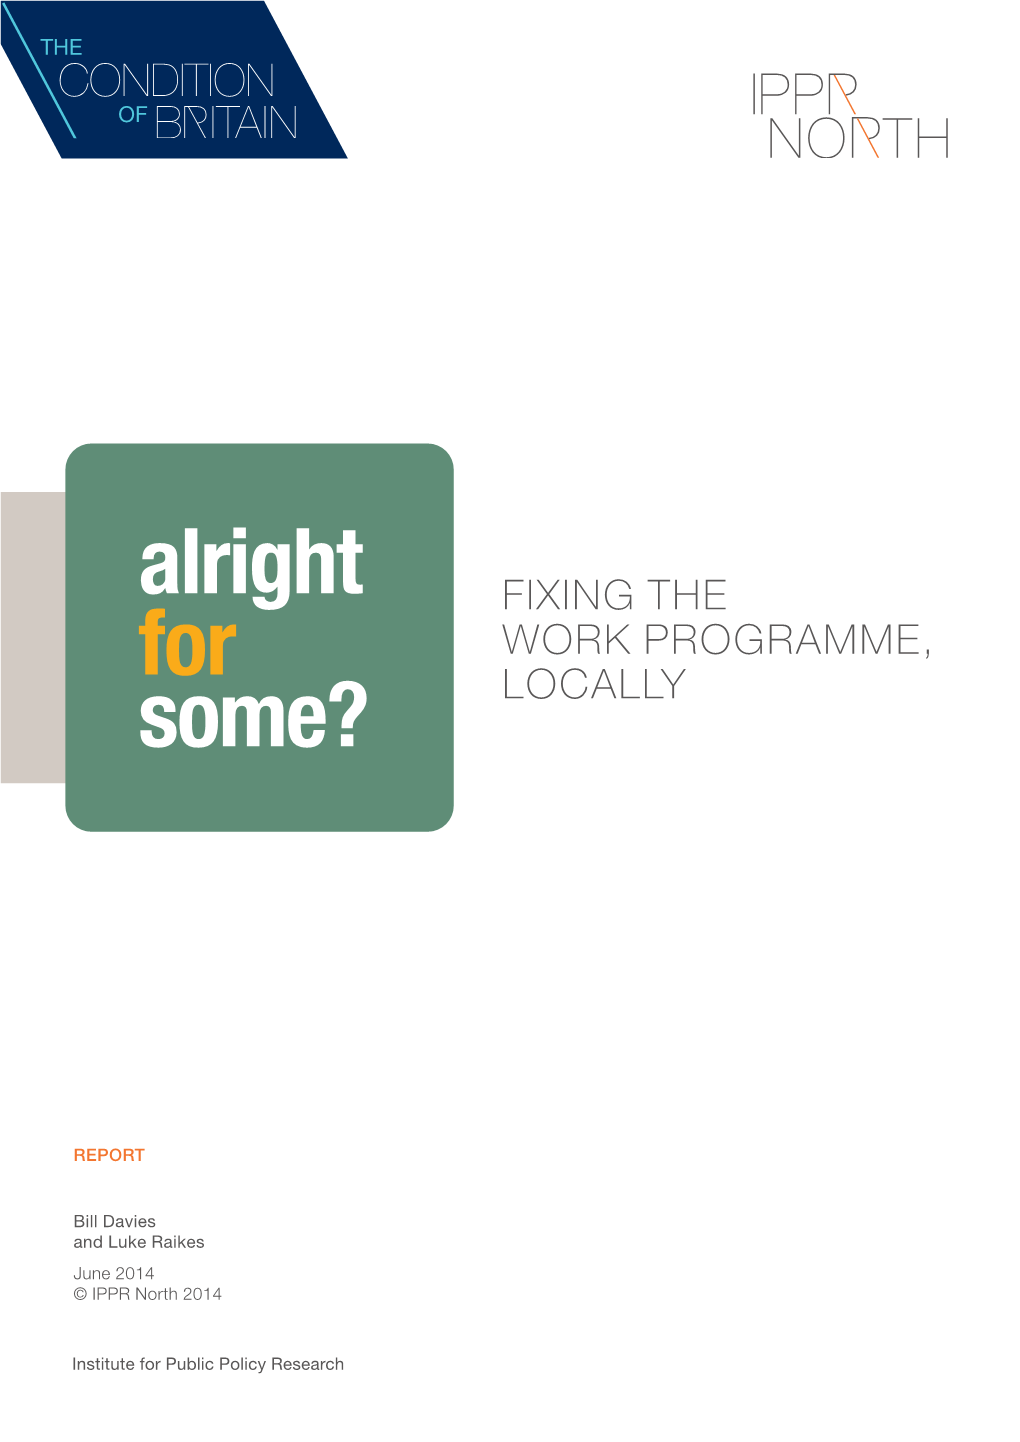 Fixing the Work Programme, Locally